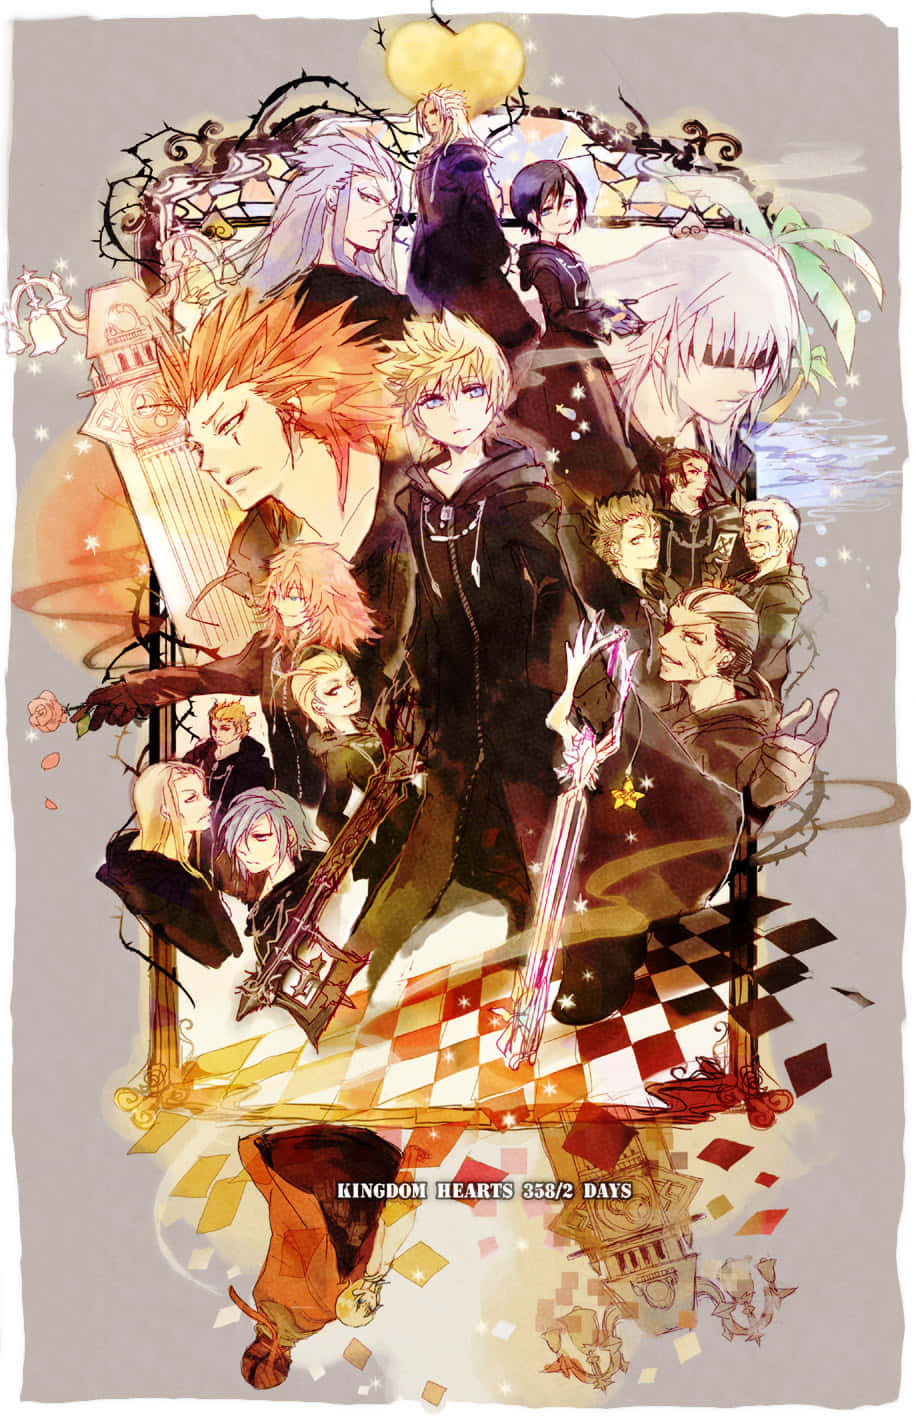 Organization XIII standing together in the world of Kingdom Hearts Wallpaper